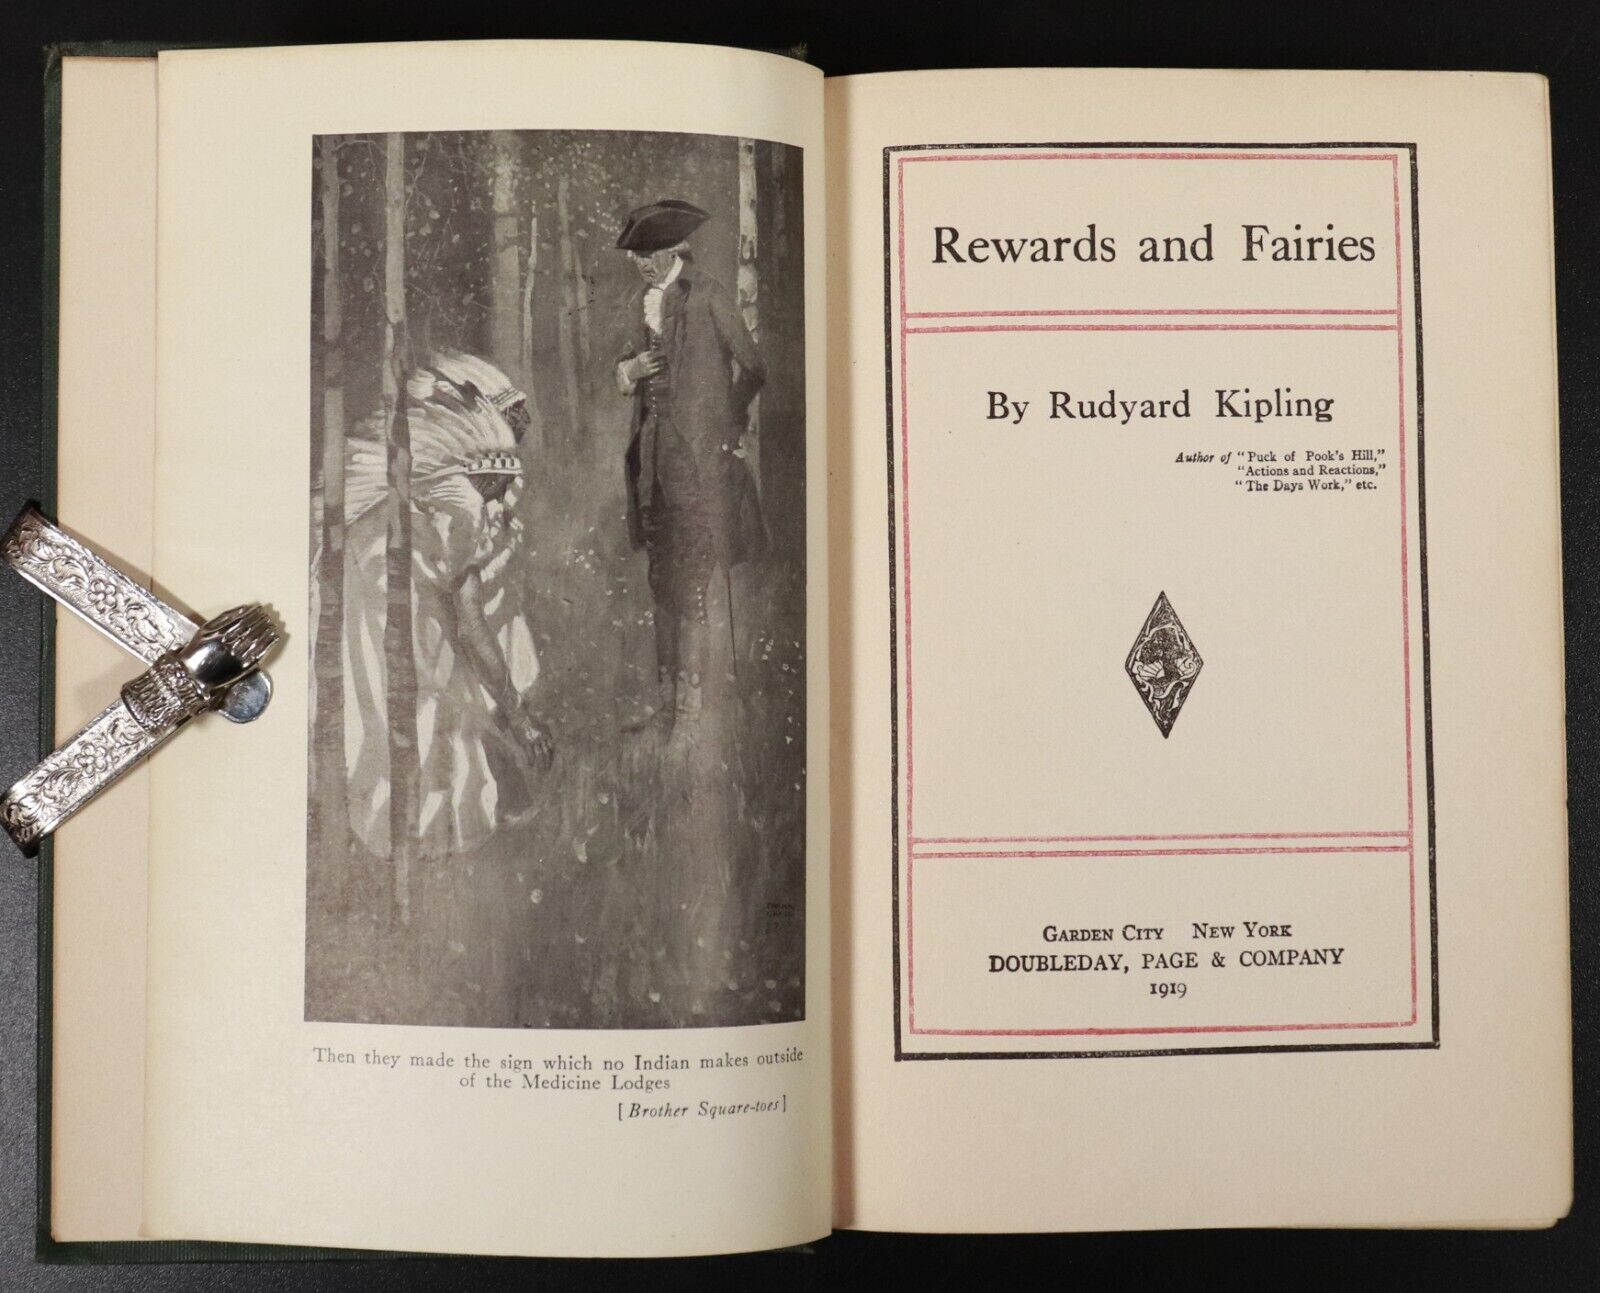 1919 Rewards and Fairies by Rudyard Kipling Antique Fiction Book Illustrated